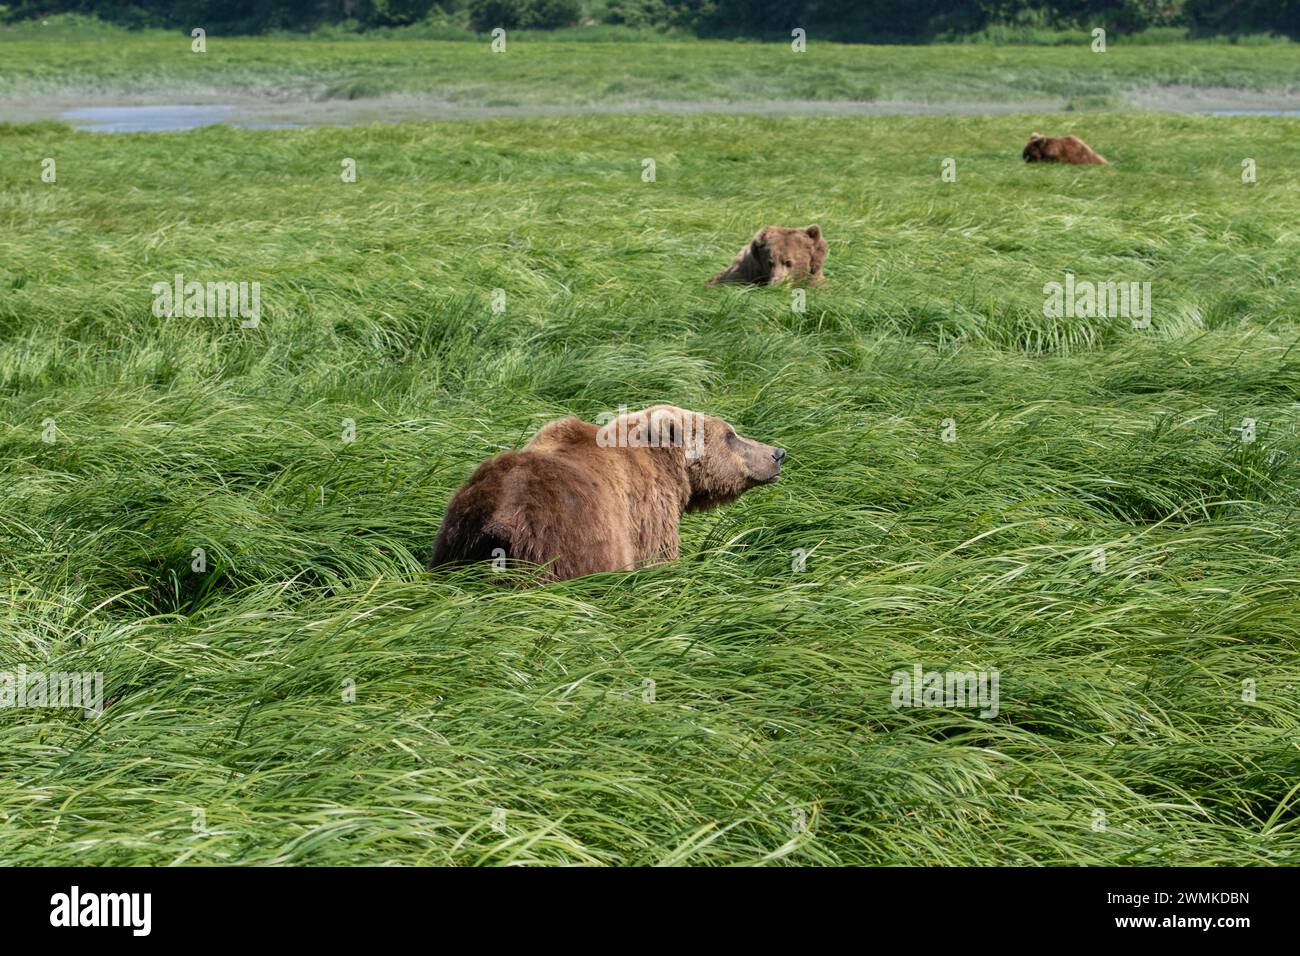 Brown bears (Ursus arctos) foraging in tall green grasses; Alaska, United States of America Stock Photo